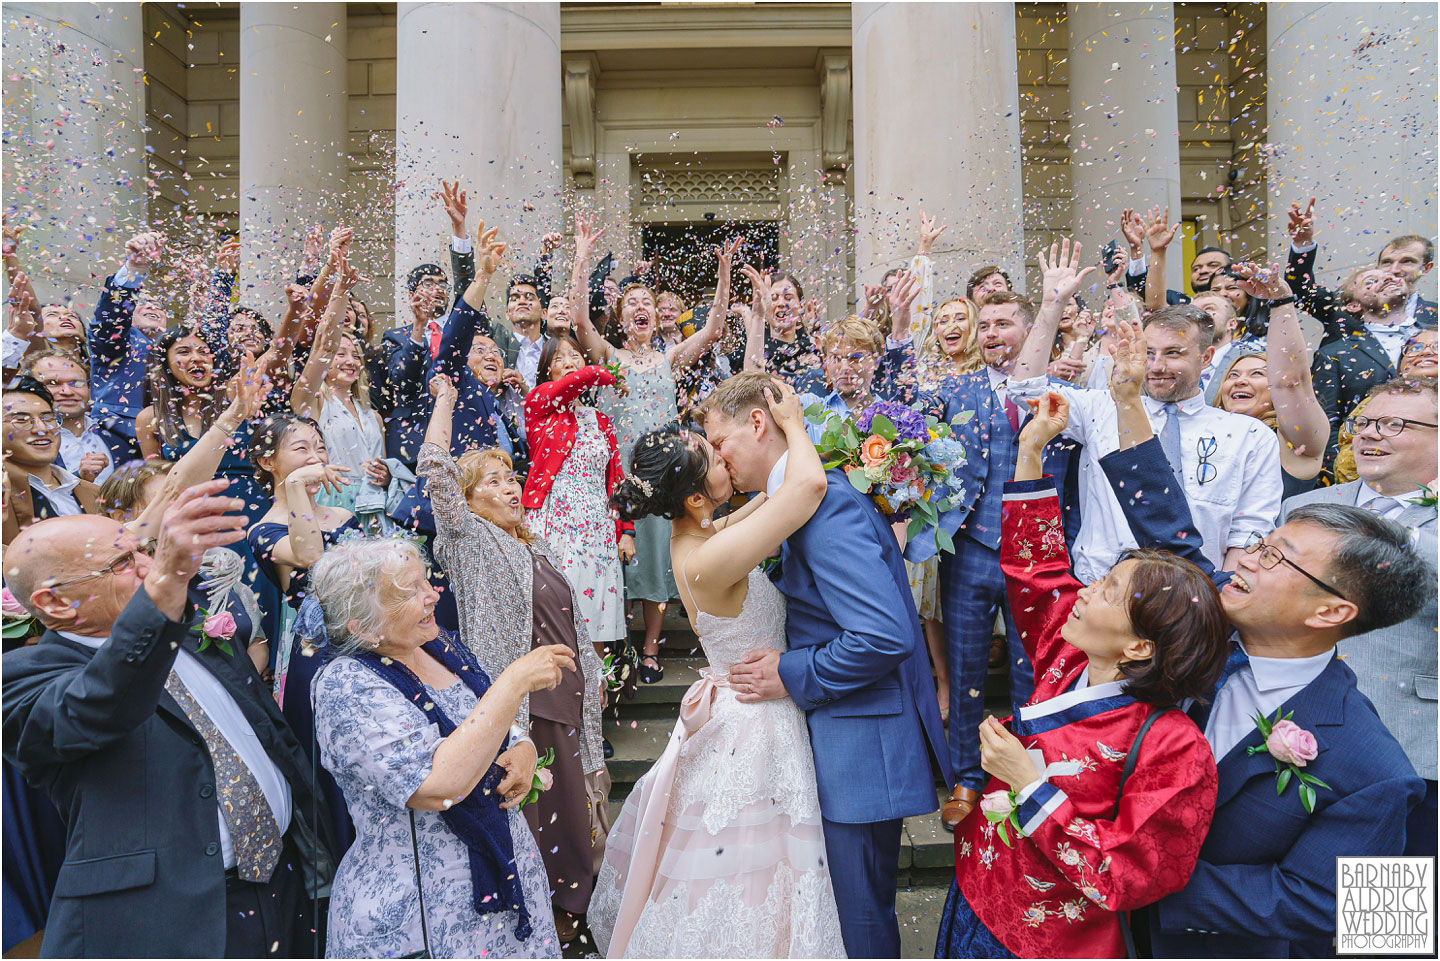 Confetti at Manchester Art Gallery, Manchester Art Gallery Wedding Photos, Manchester Art Gallery Wedding Photos, Manchester Art Gallery Wedding, Lancashire Wedding Photography